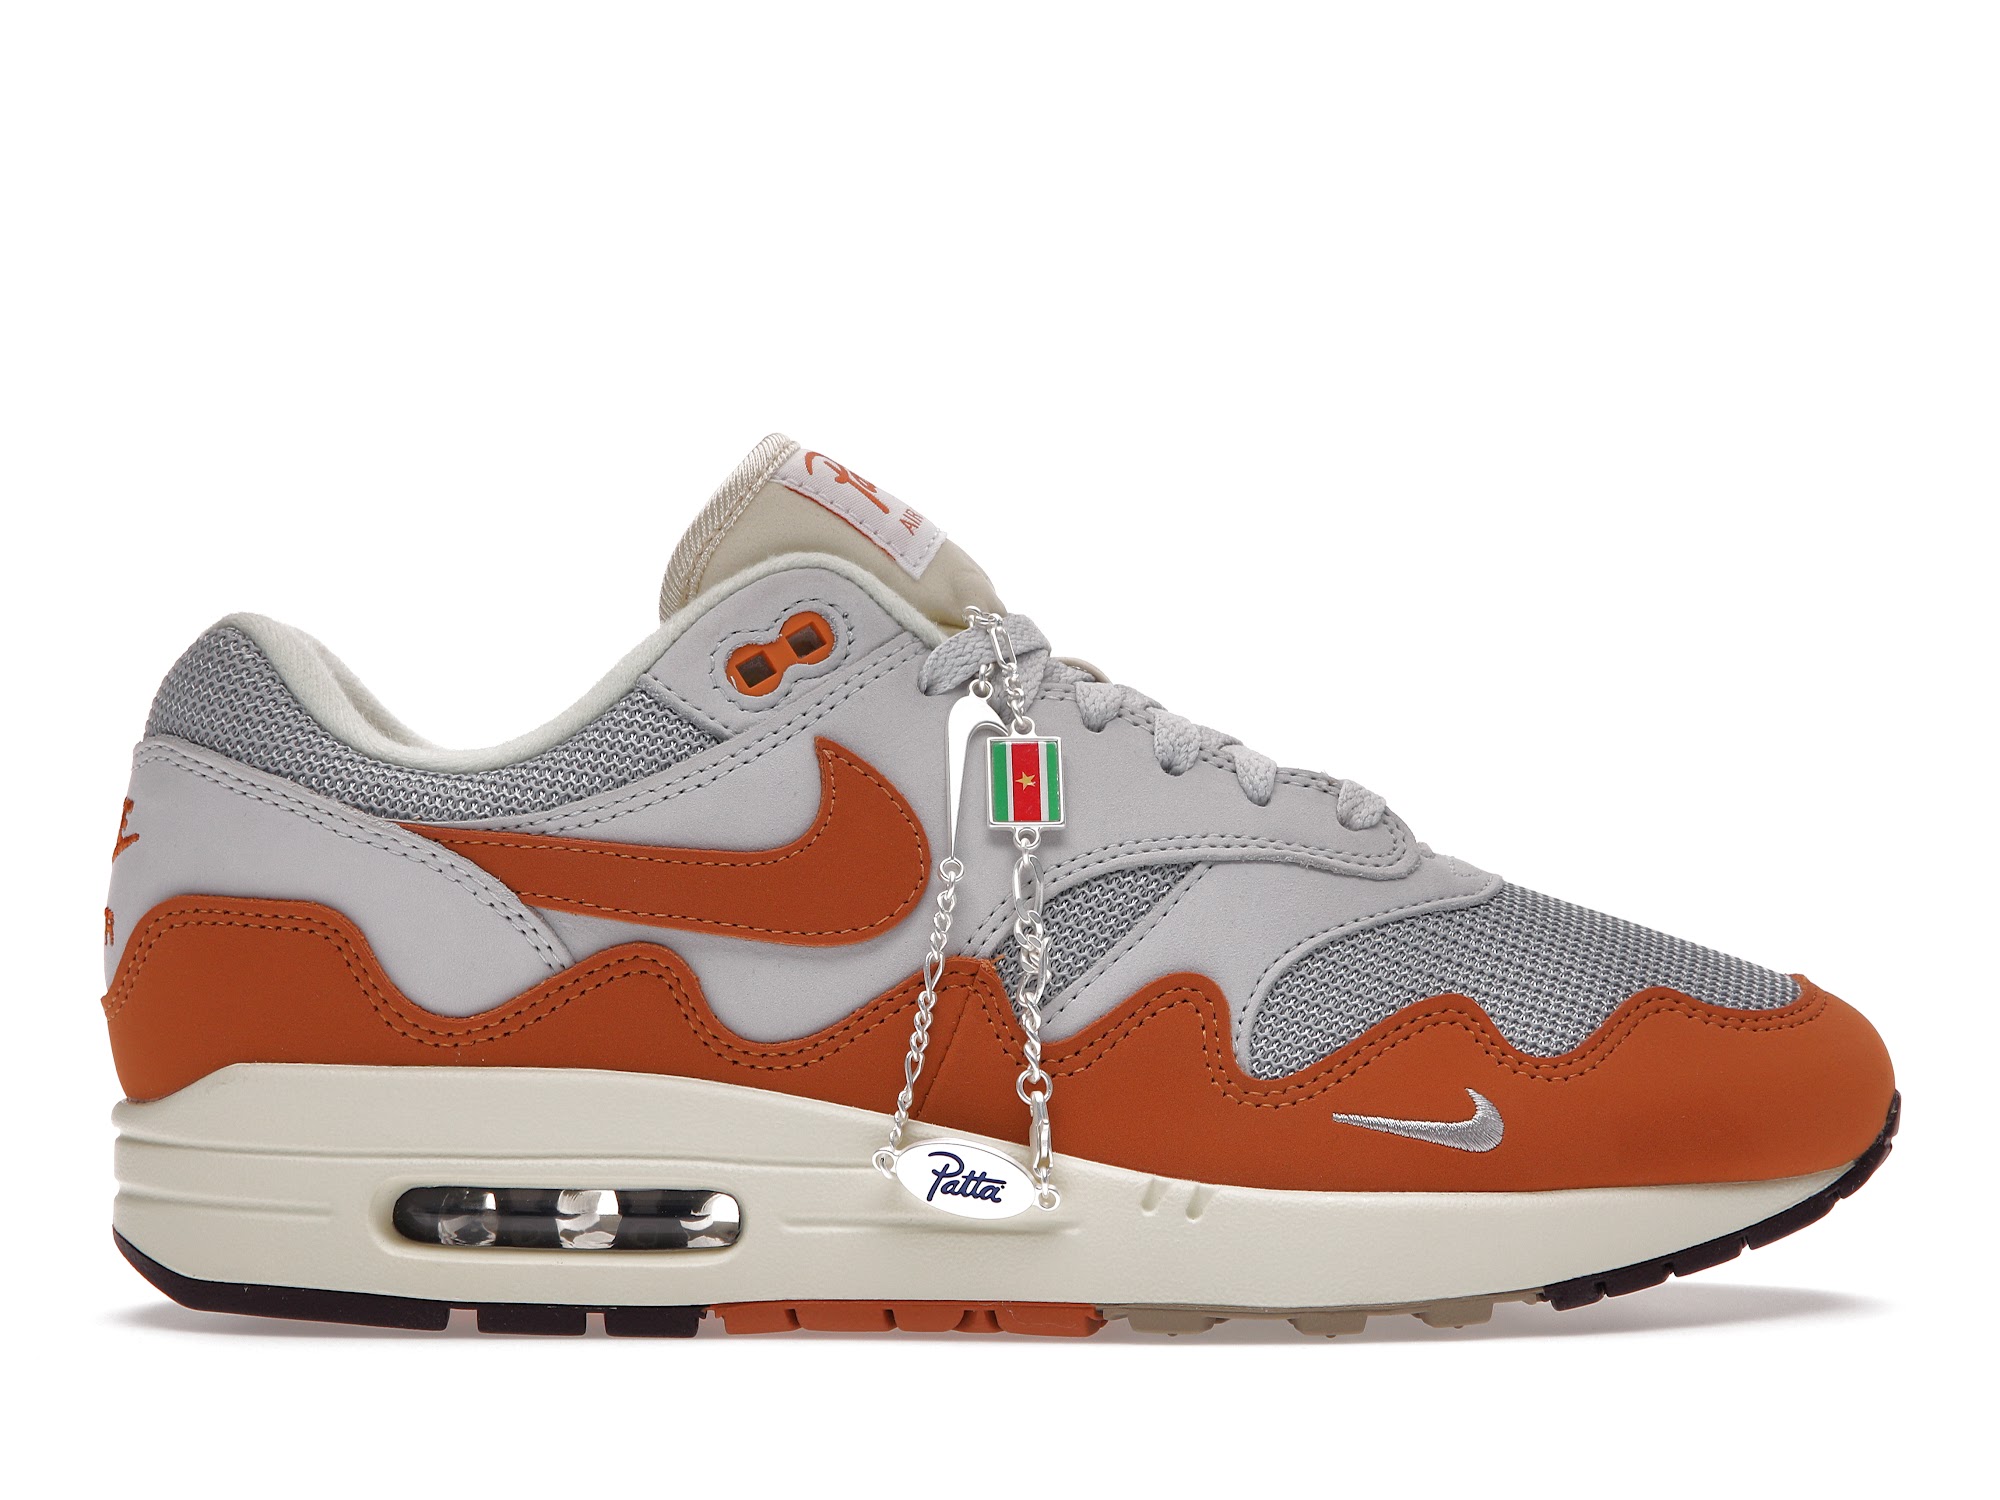 Nike Air Max 1 Patta Waves Monarch (with Bracelet) Men's - DH1348